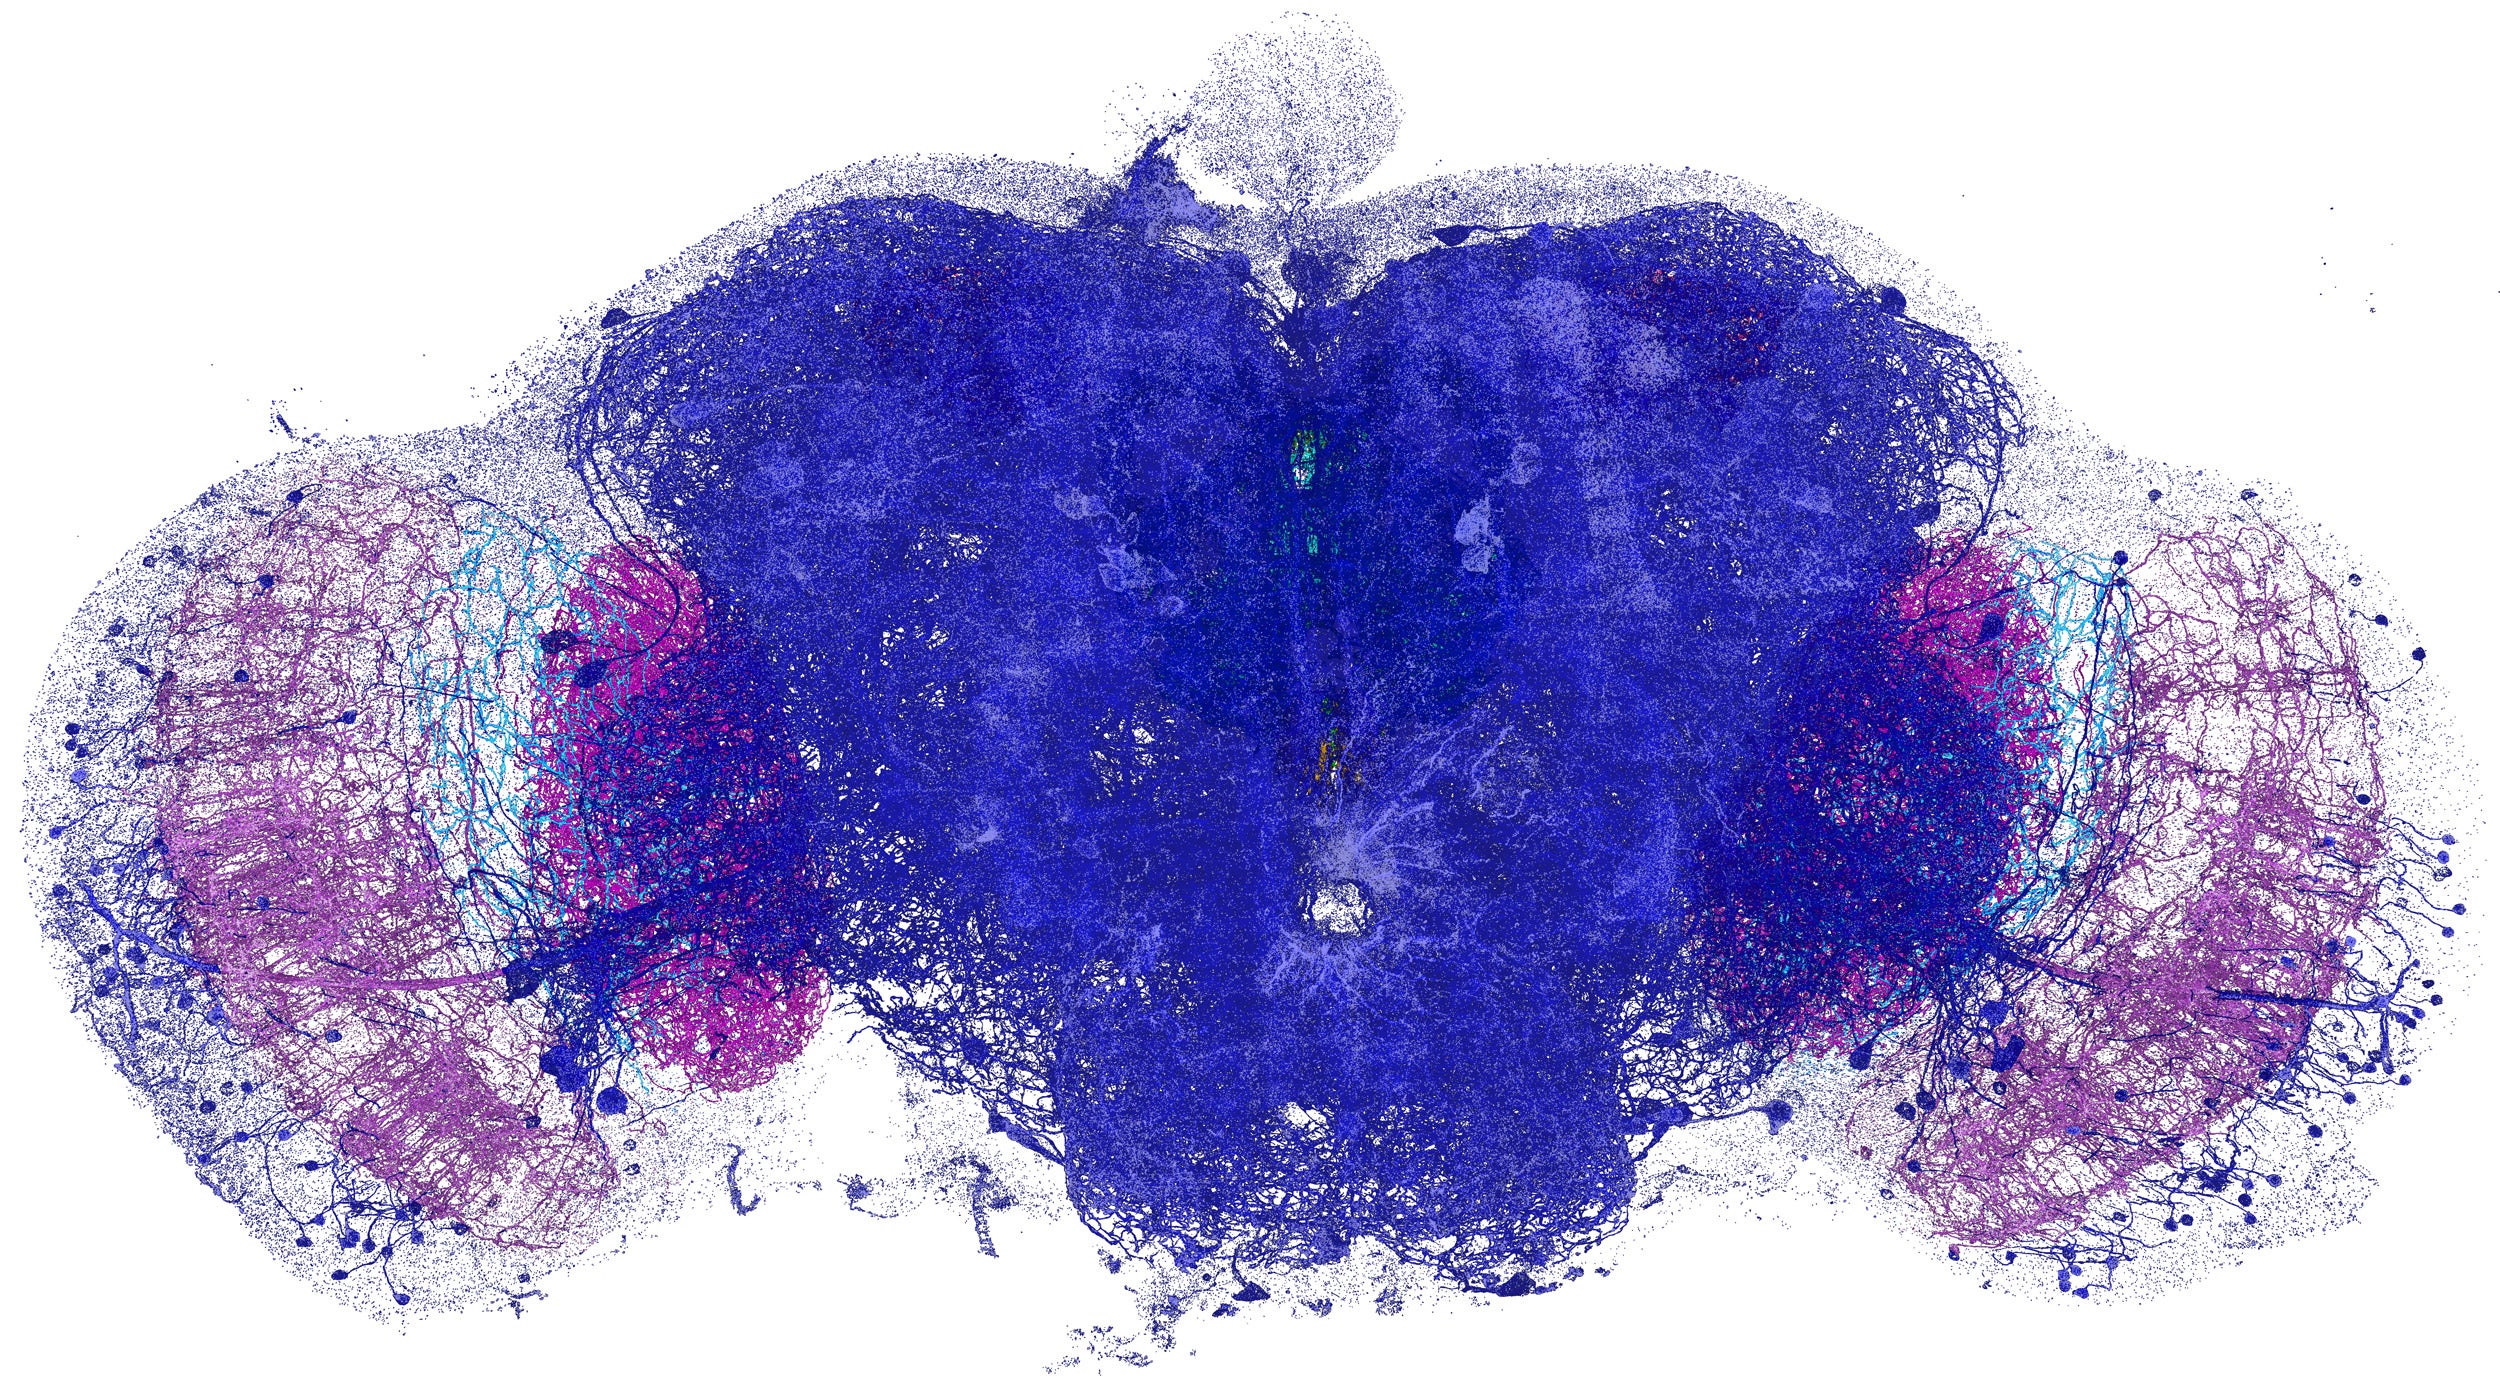 Dopaminergic neurons and associated synaptic proteins across the entire fruit fly brain.